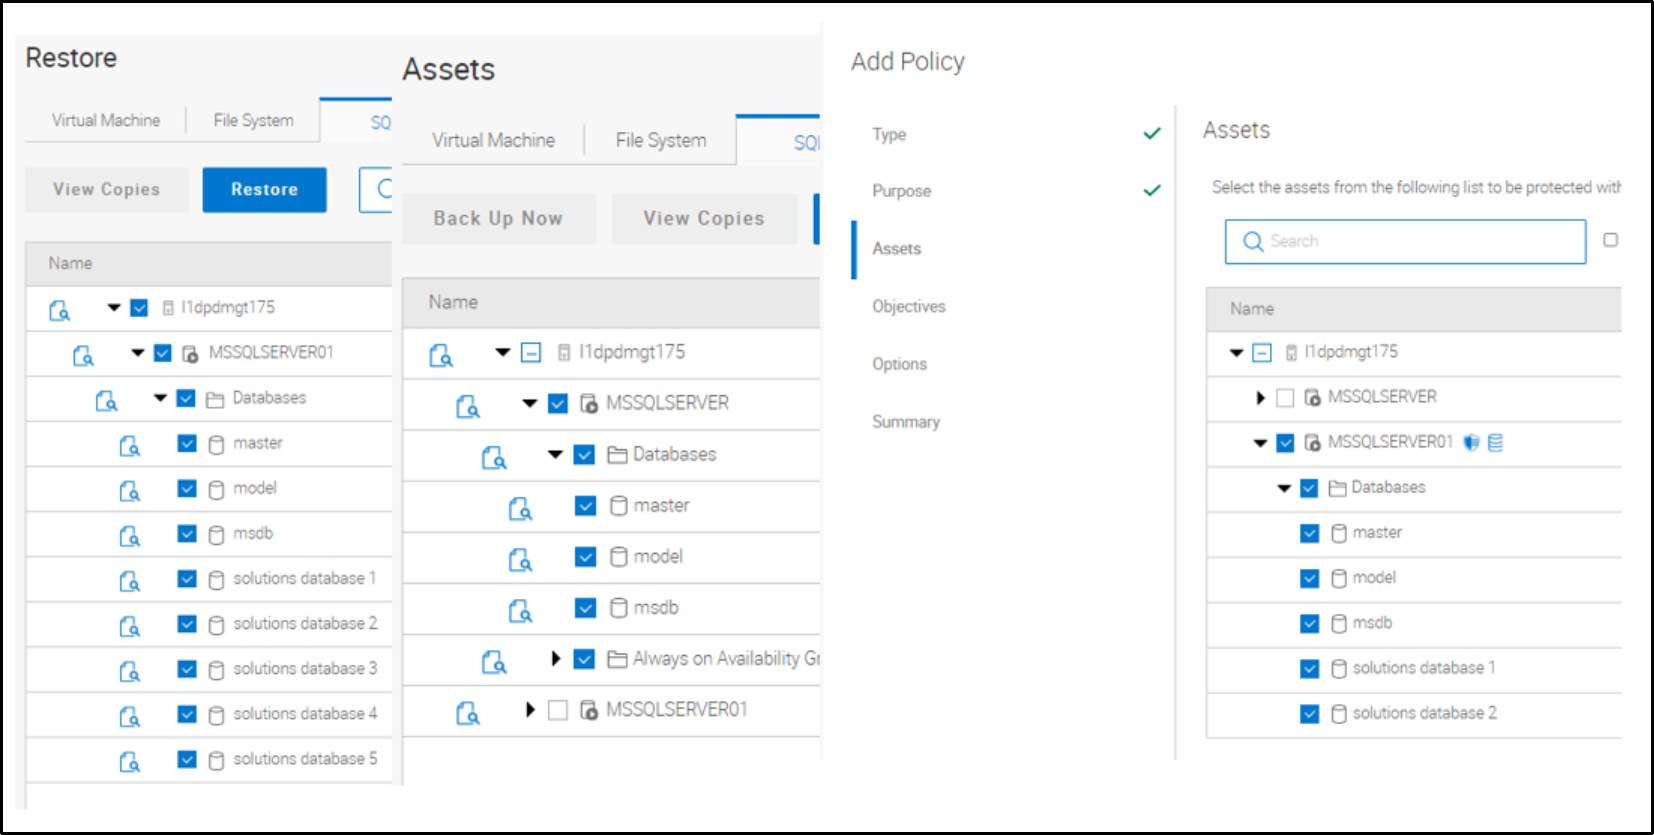 The image shows the native assets view for SQL assets.